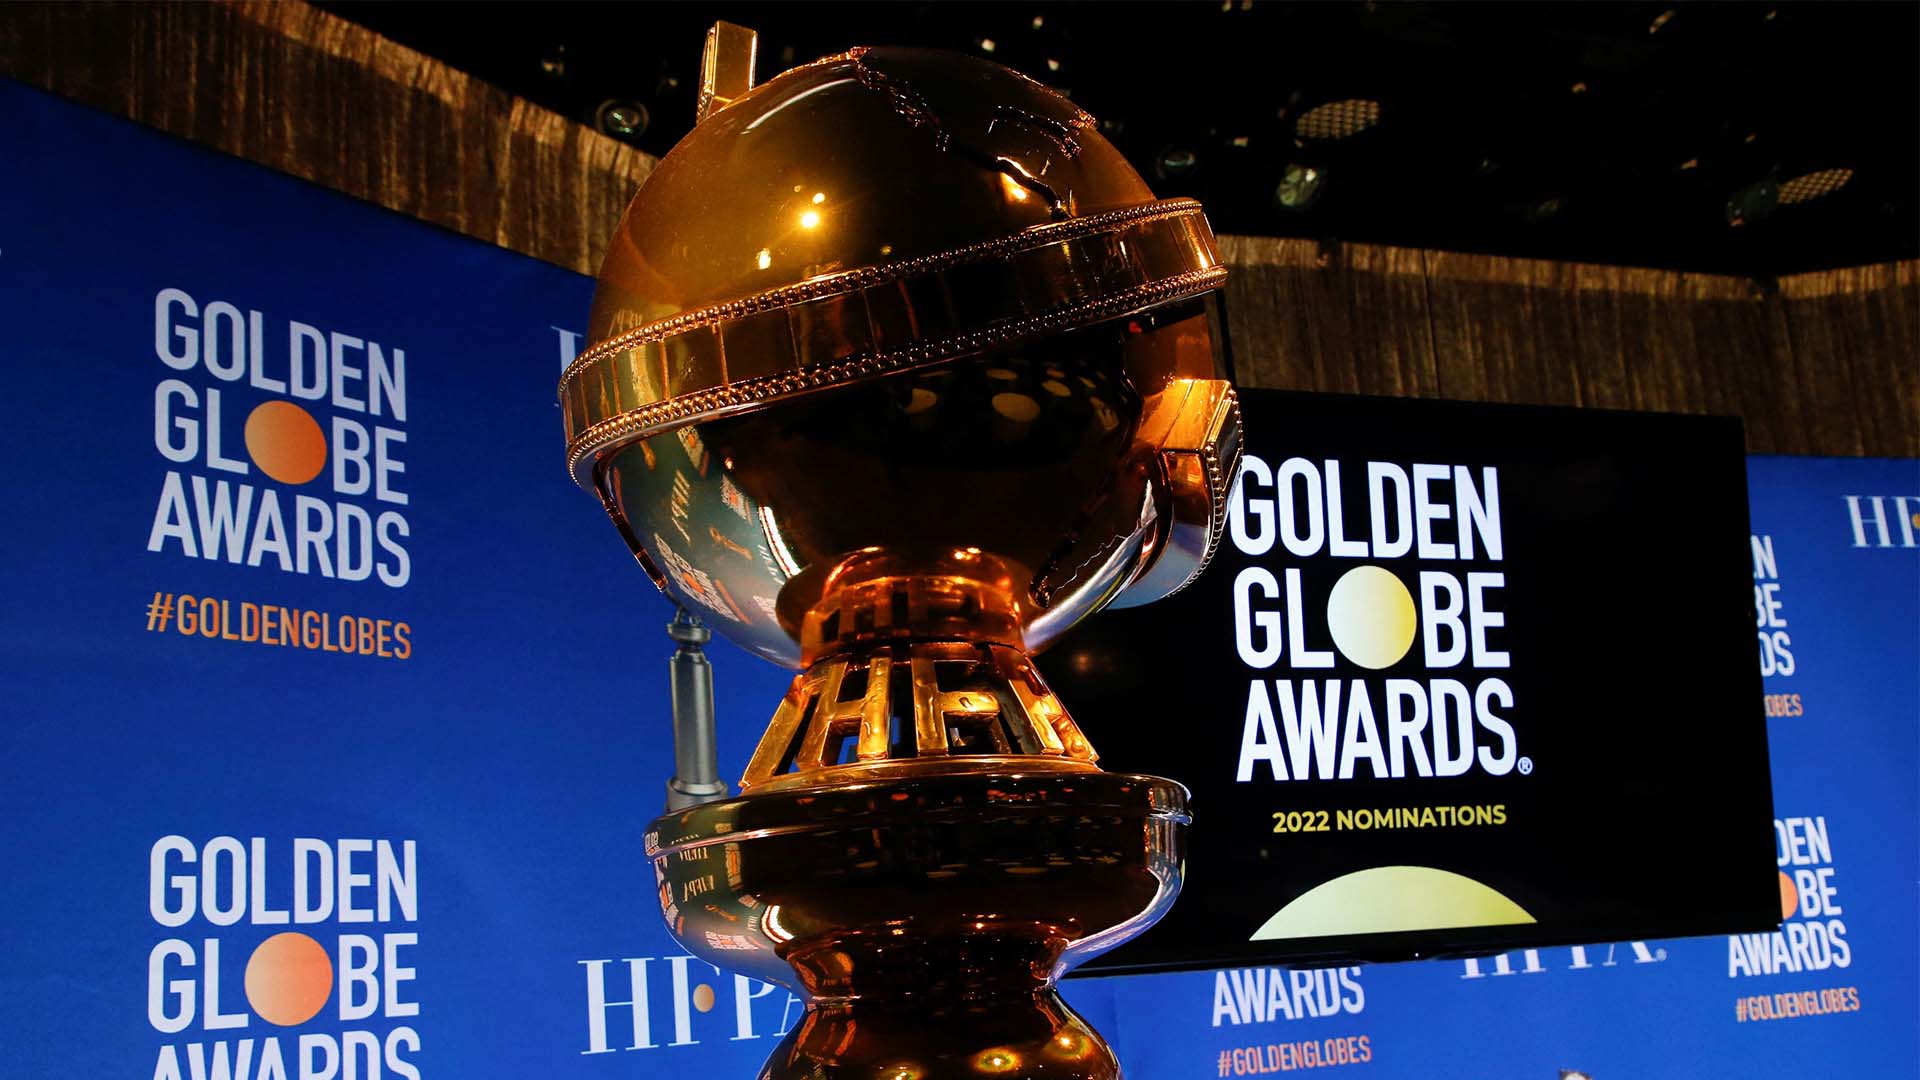 Golden Globes Winners 2023 announced, check the complete list_40.1